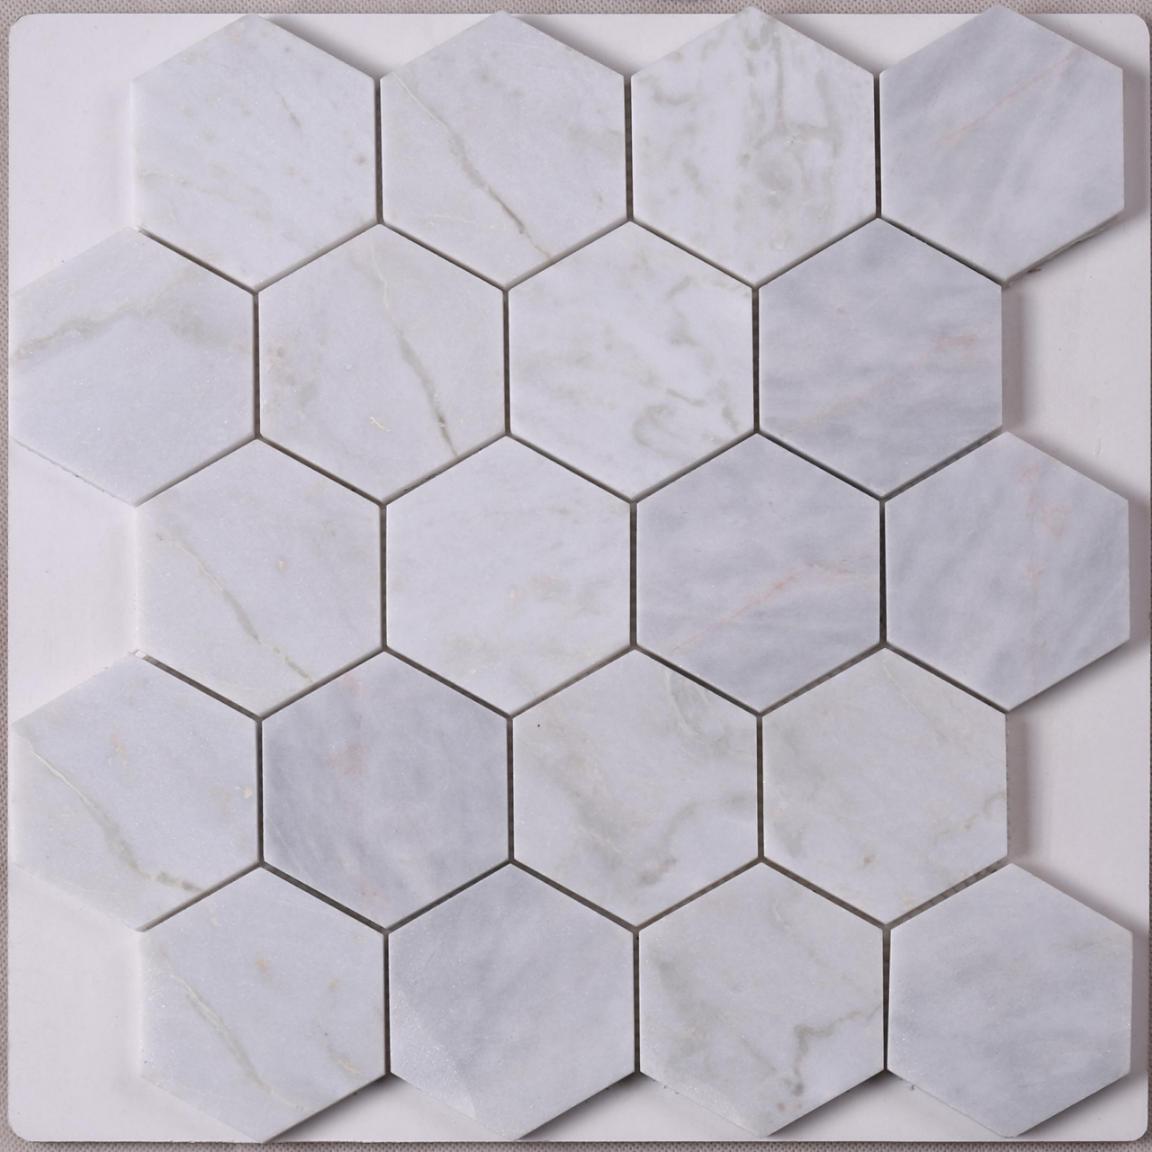 Heng Xing 3x3 glass stone mosaic inquire now for backsplash-1